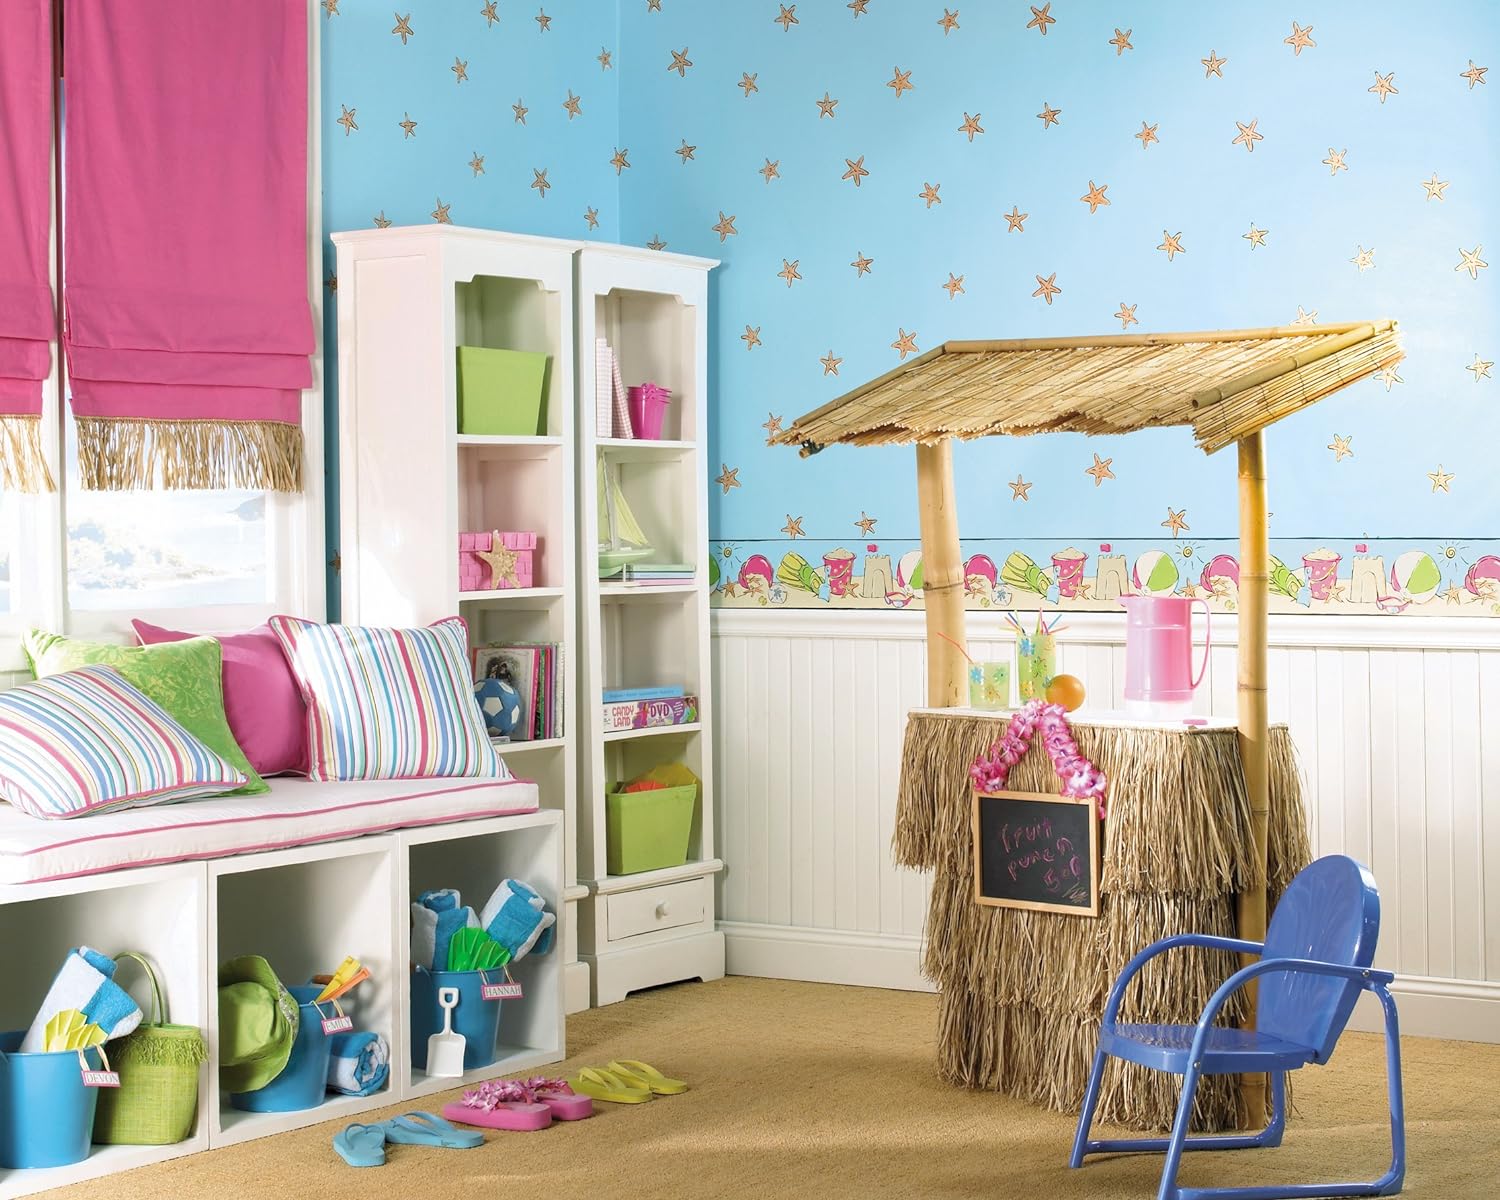 York Wallcoverings Candice Olson Kids CK7764B A Day at The Beach, Green